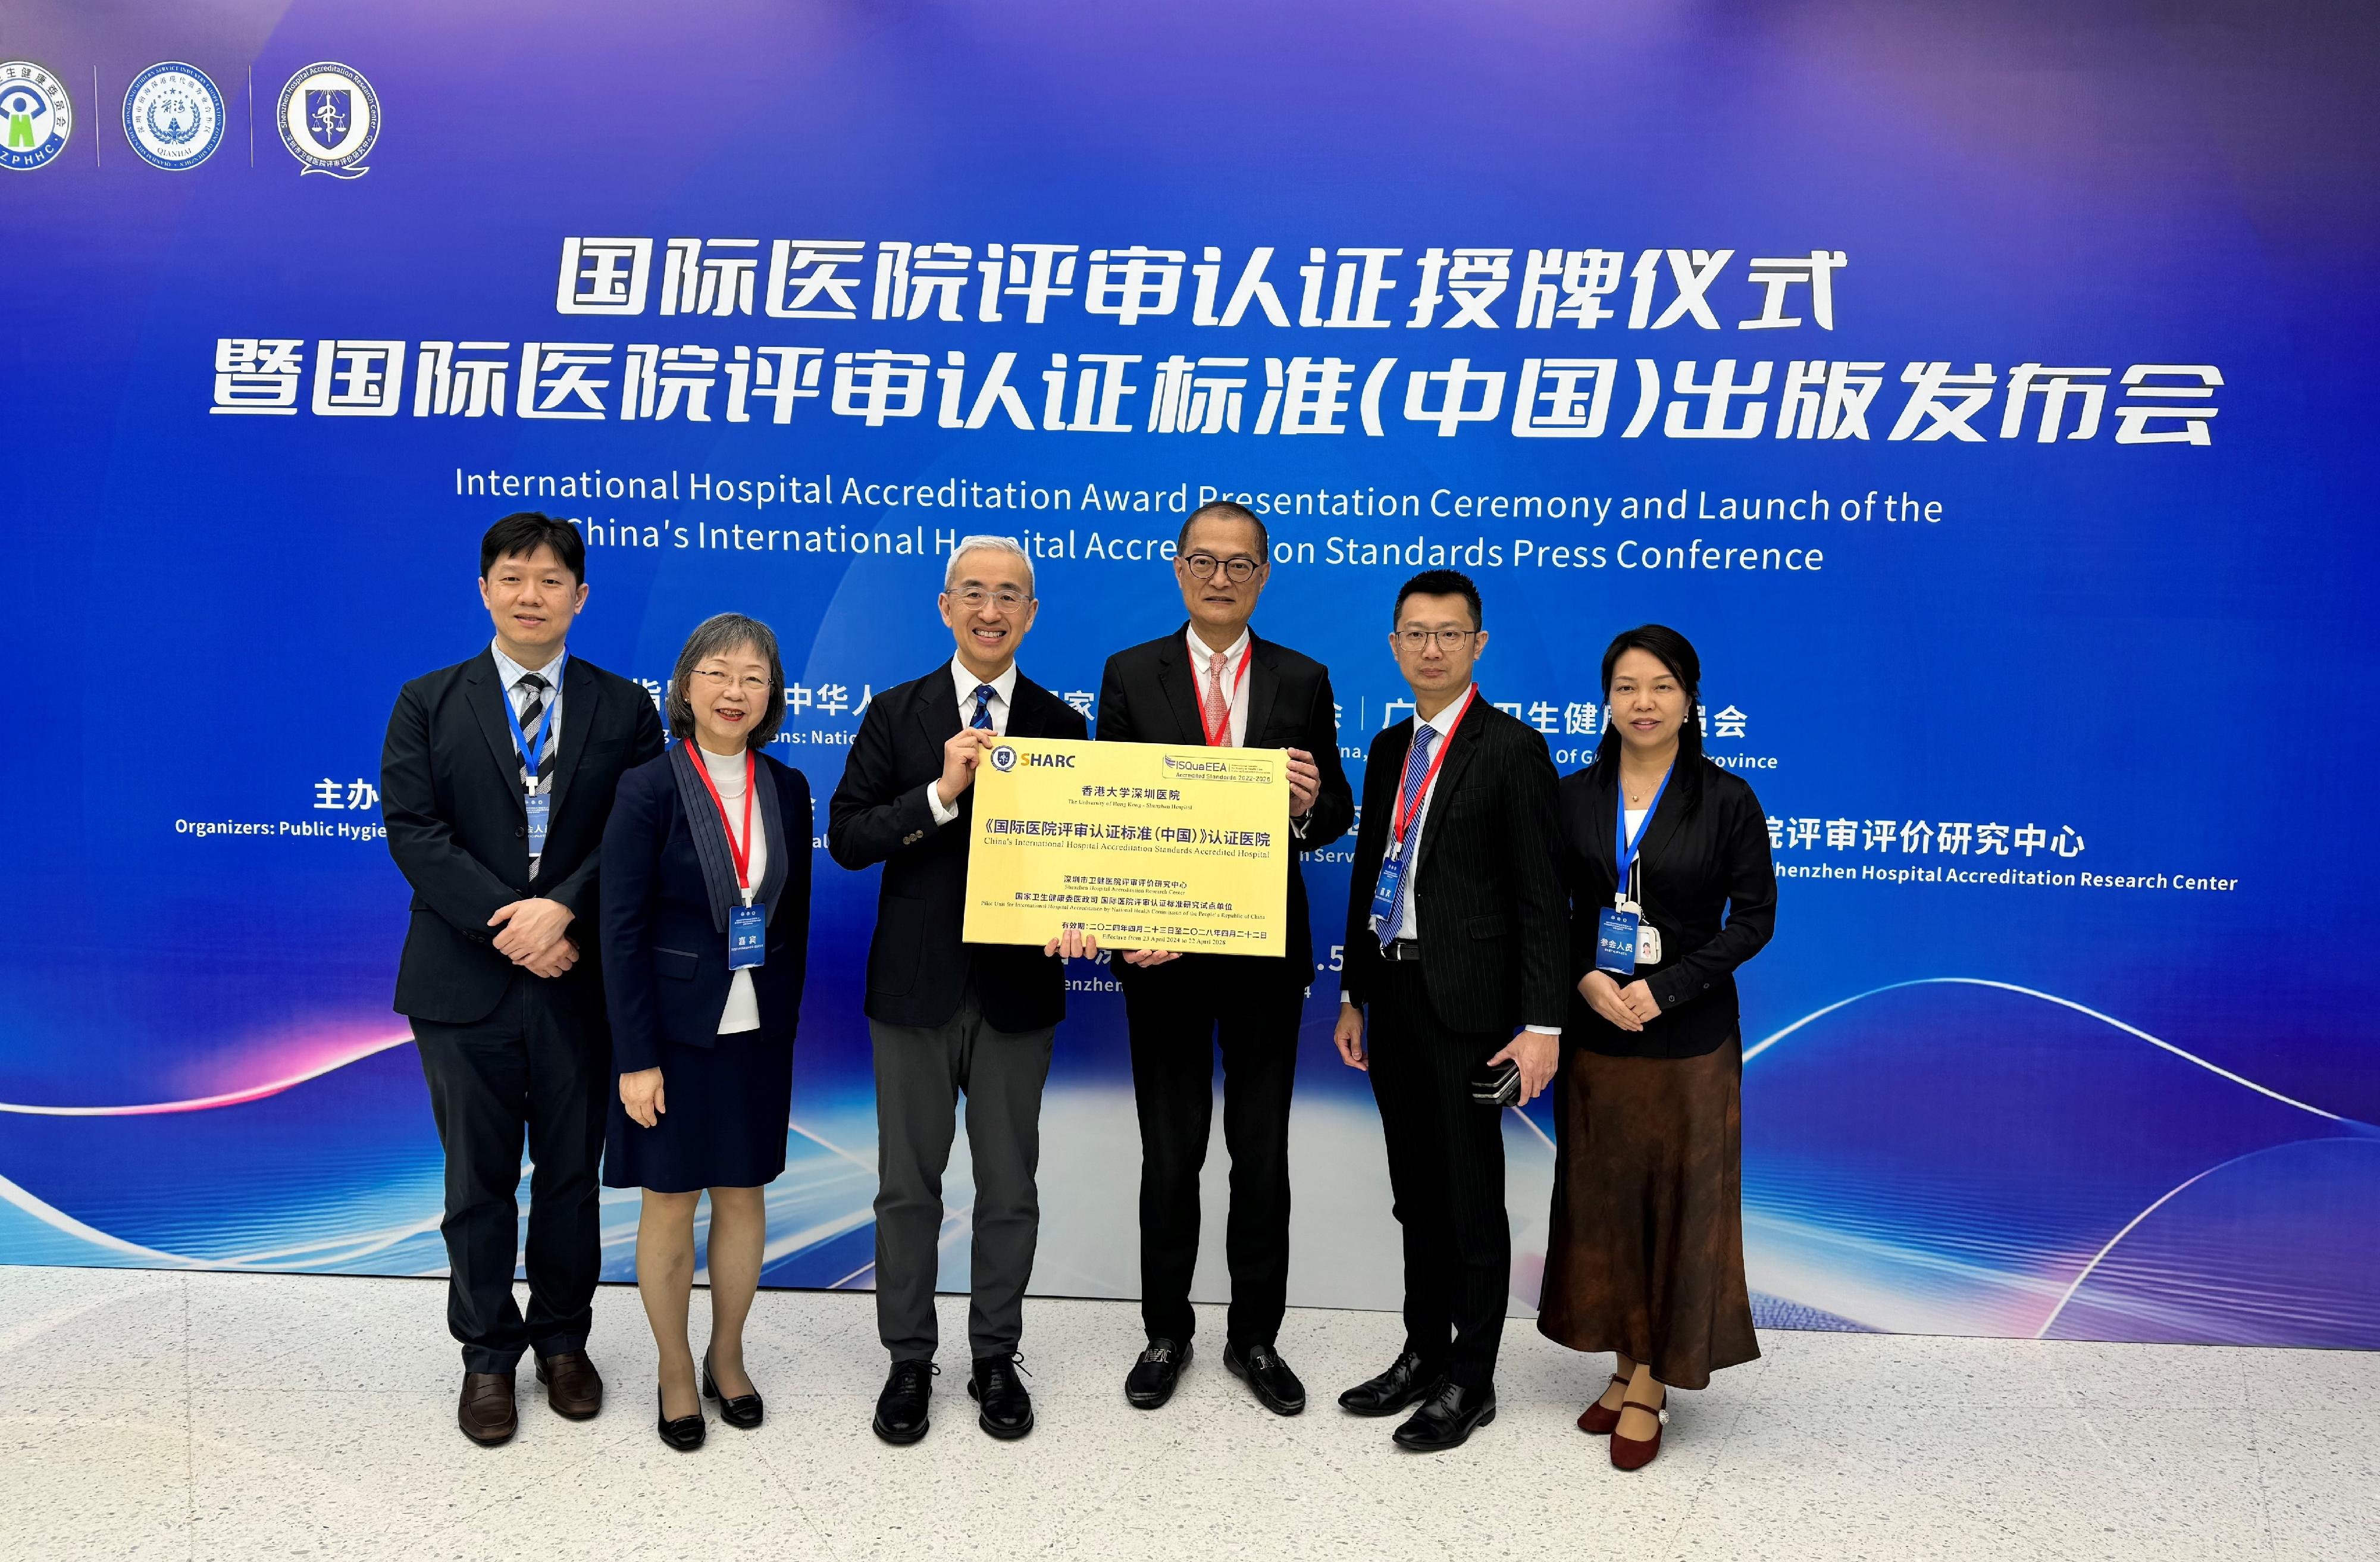 The Secretary for Health, Professor Lo Chung-mau, attended the International Hospital Accreditation Award Presentation Ceremony and Launch of the China’s International Hospital Accreditation Standards Press Conference held in Qianhai, Shenzhen, today (June 5). Professor Lo (third right) and the Senior Advisor (Secretary for Health's Office), Dr Joe Fan (second right), are pictured with the Hospital Chief Executive of the University of Hong Kong - Shenzhen Hospital (HKU-SZH), Professor Kenneth Cheung (third left), and other senior management of the hospital after witnessing the accreditation of the HKU-SZH under the China's International Hospital Accreditation Standards (2021 Version).